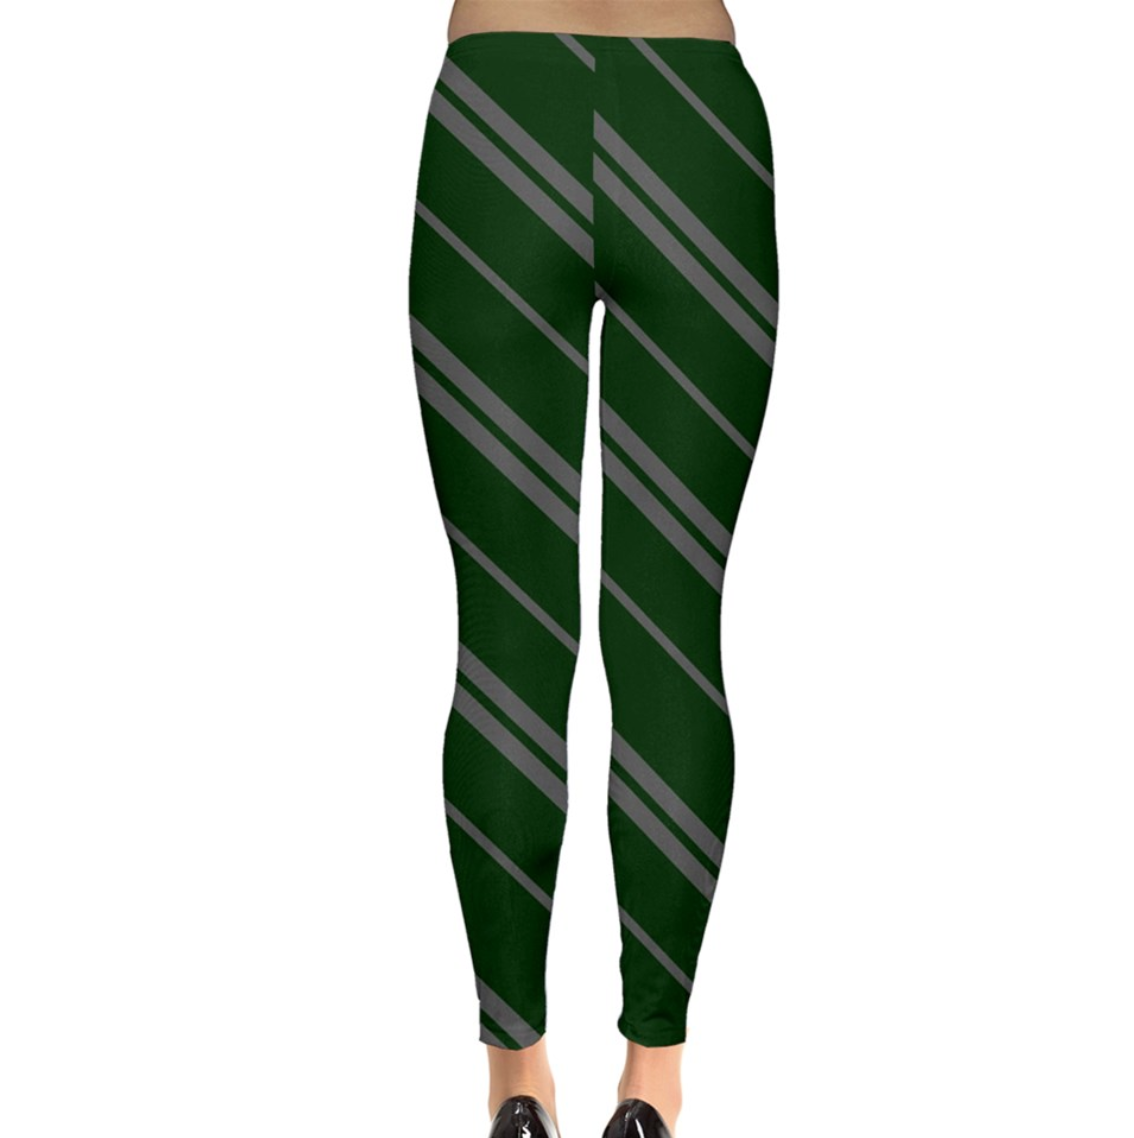 Green & Gray Striped Leggings - Inspired by Slytherin